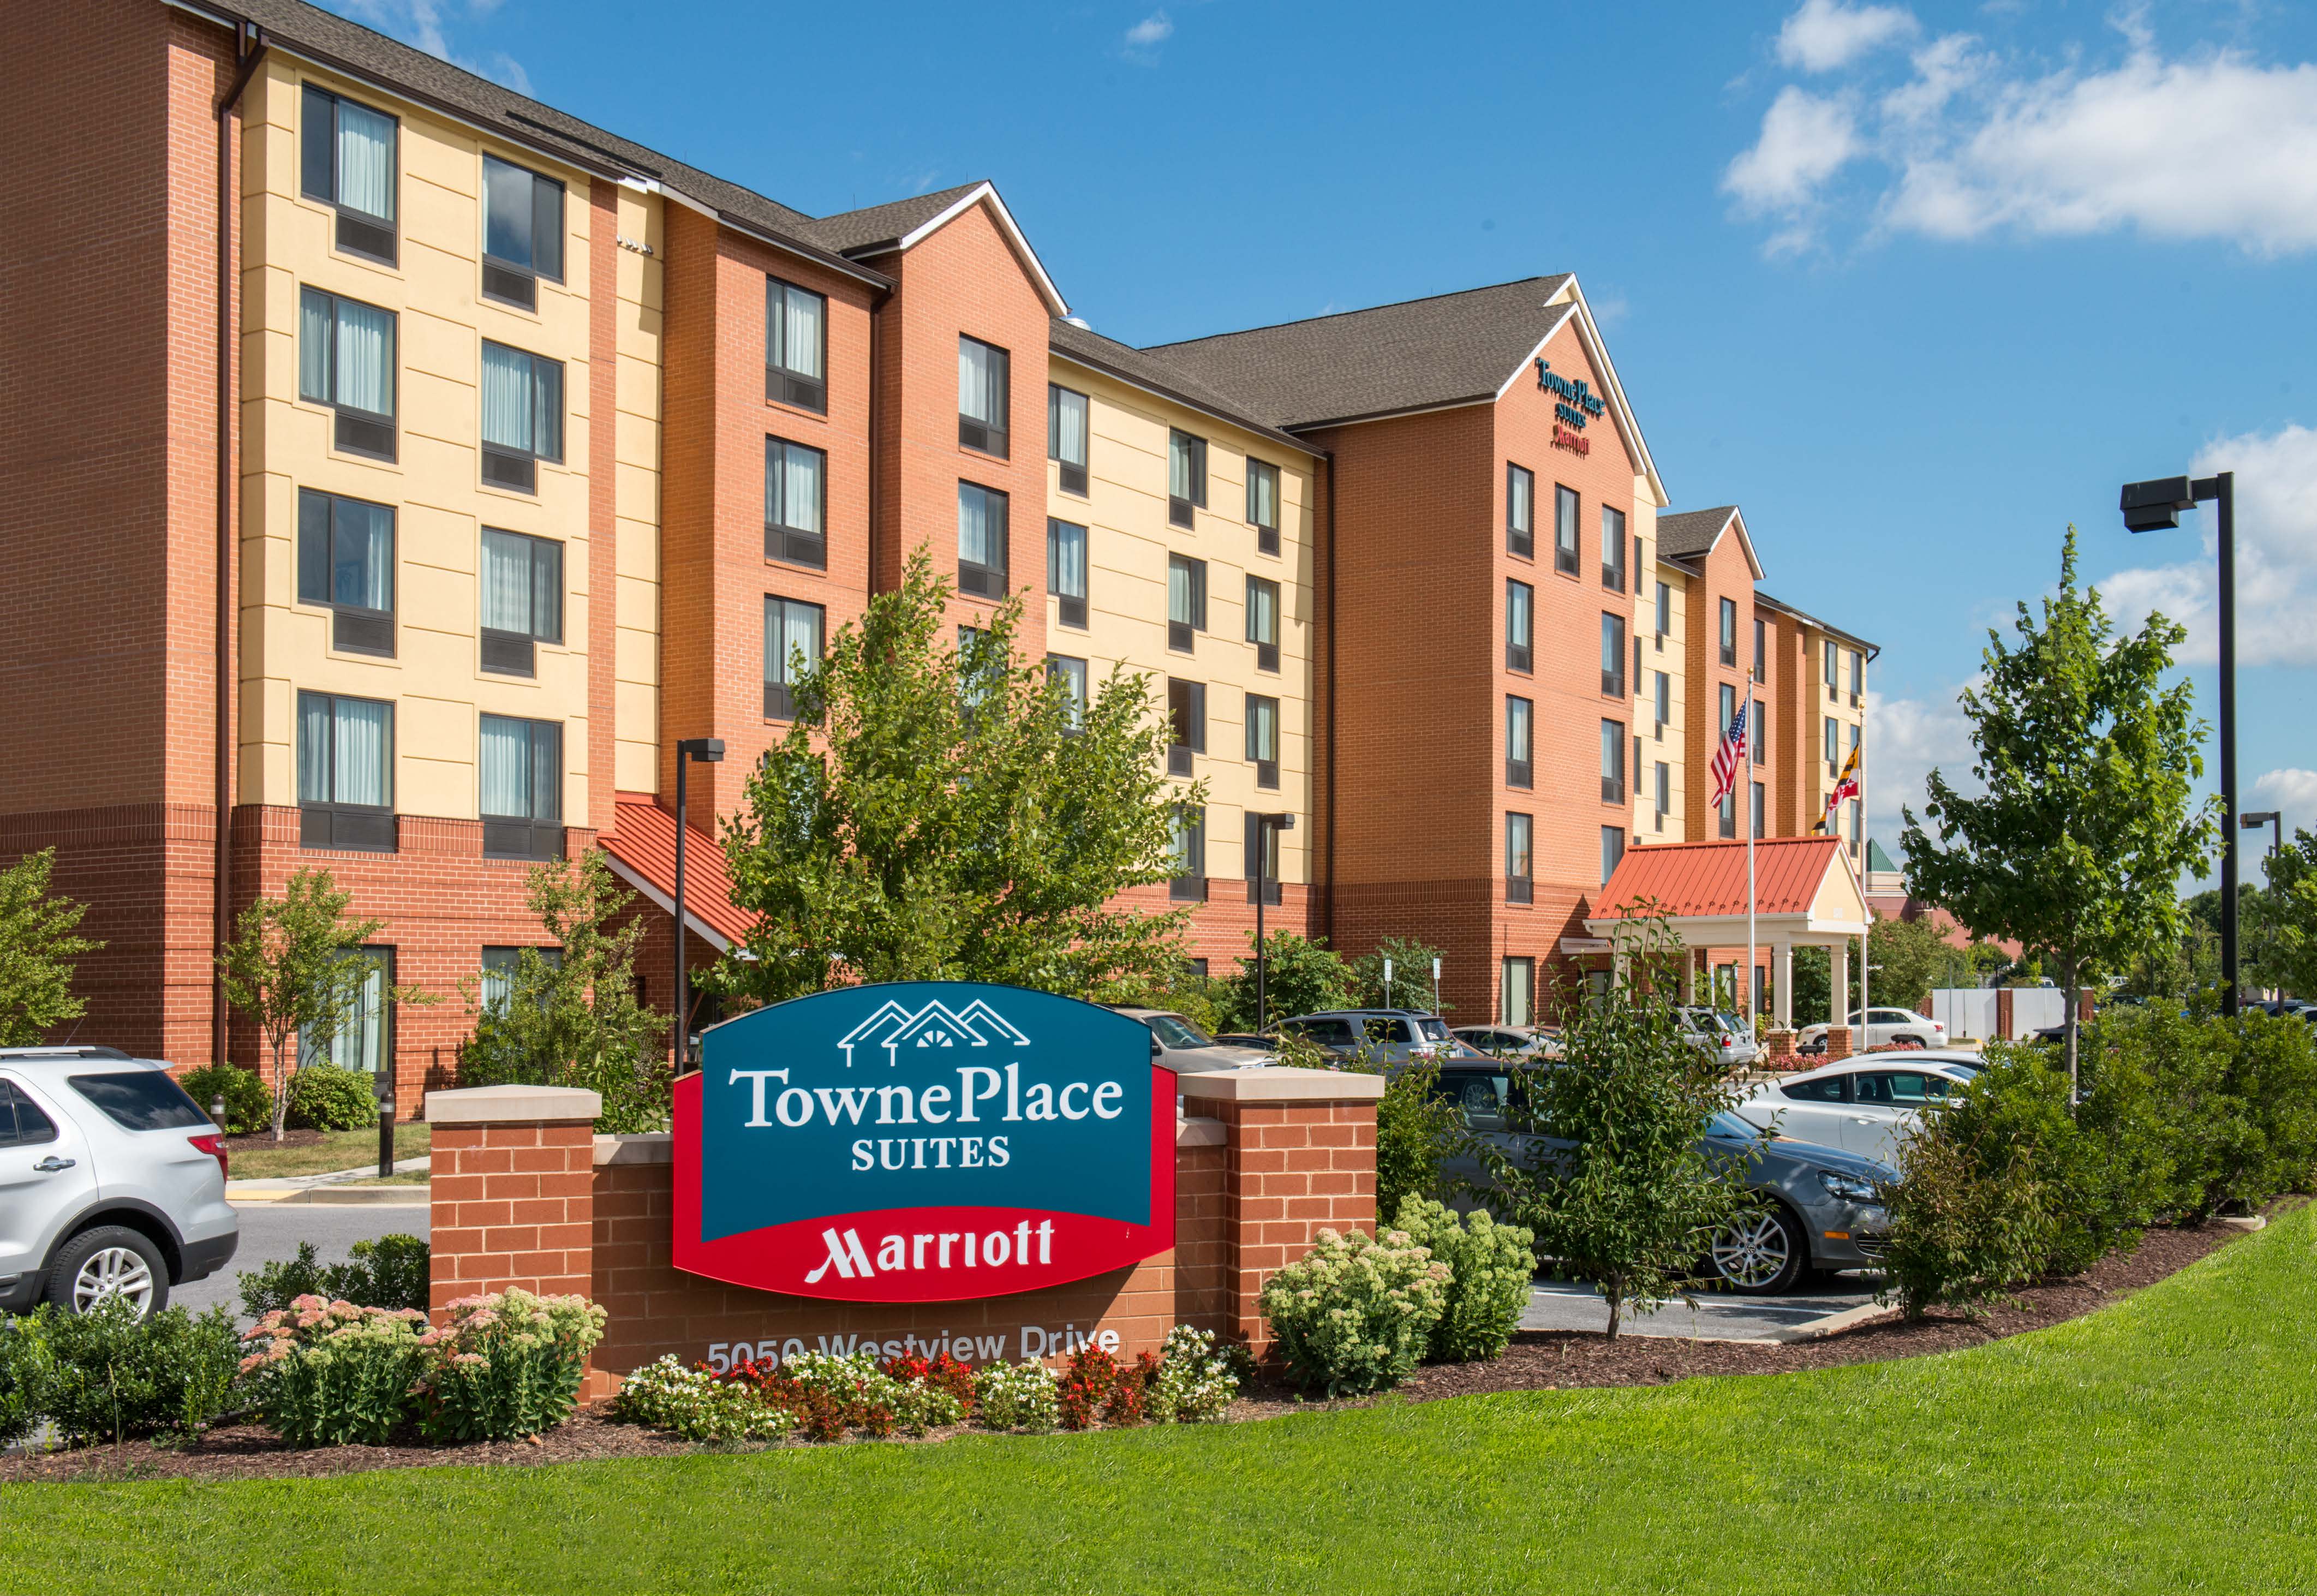 Towneplace Suites By Marriott Frederick Frederick Md 21703